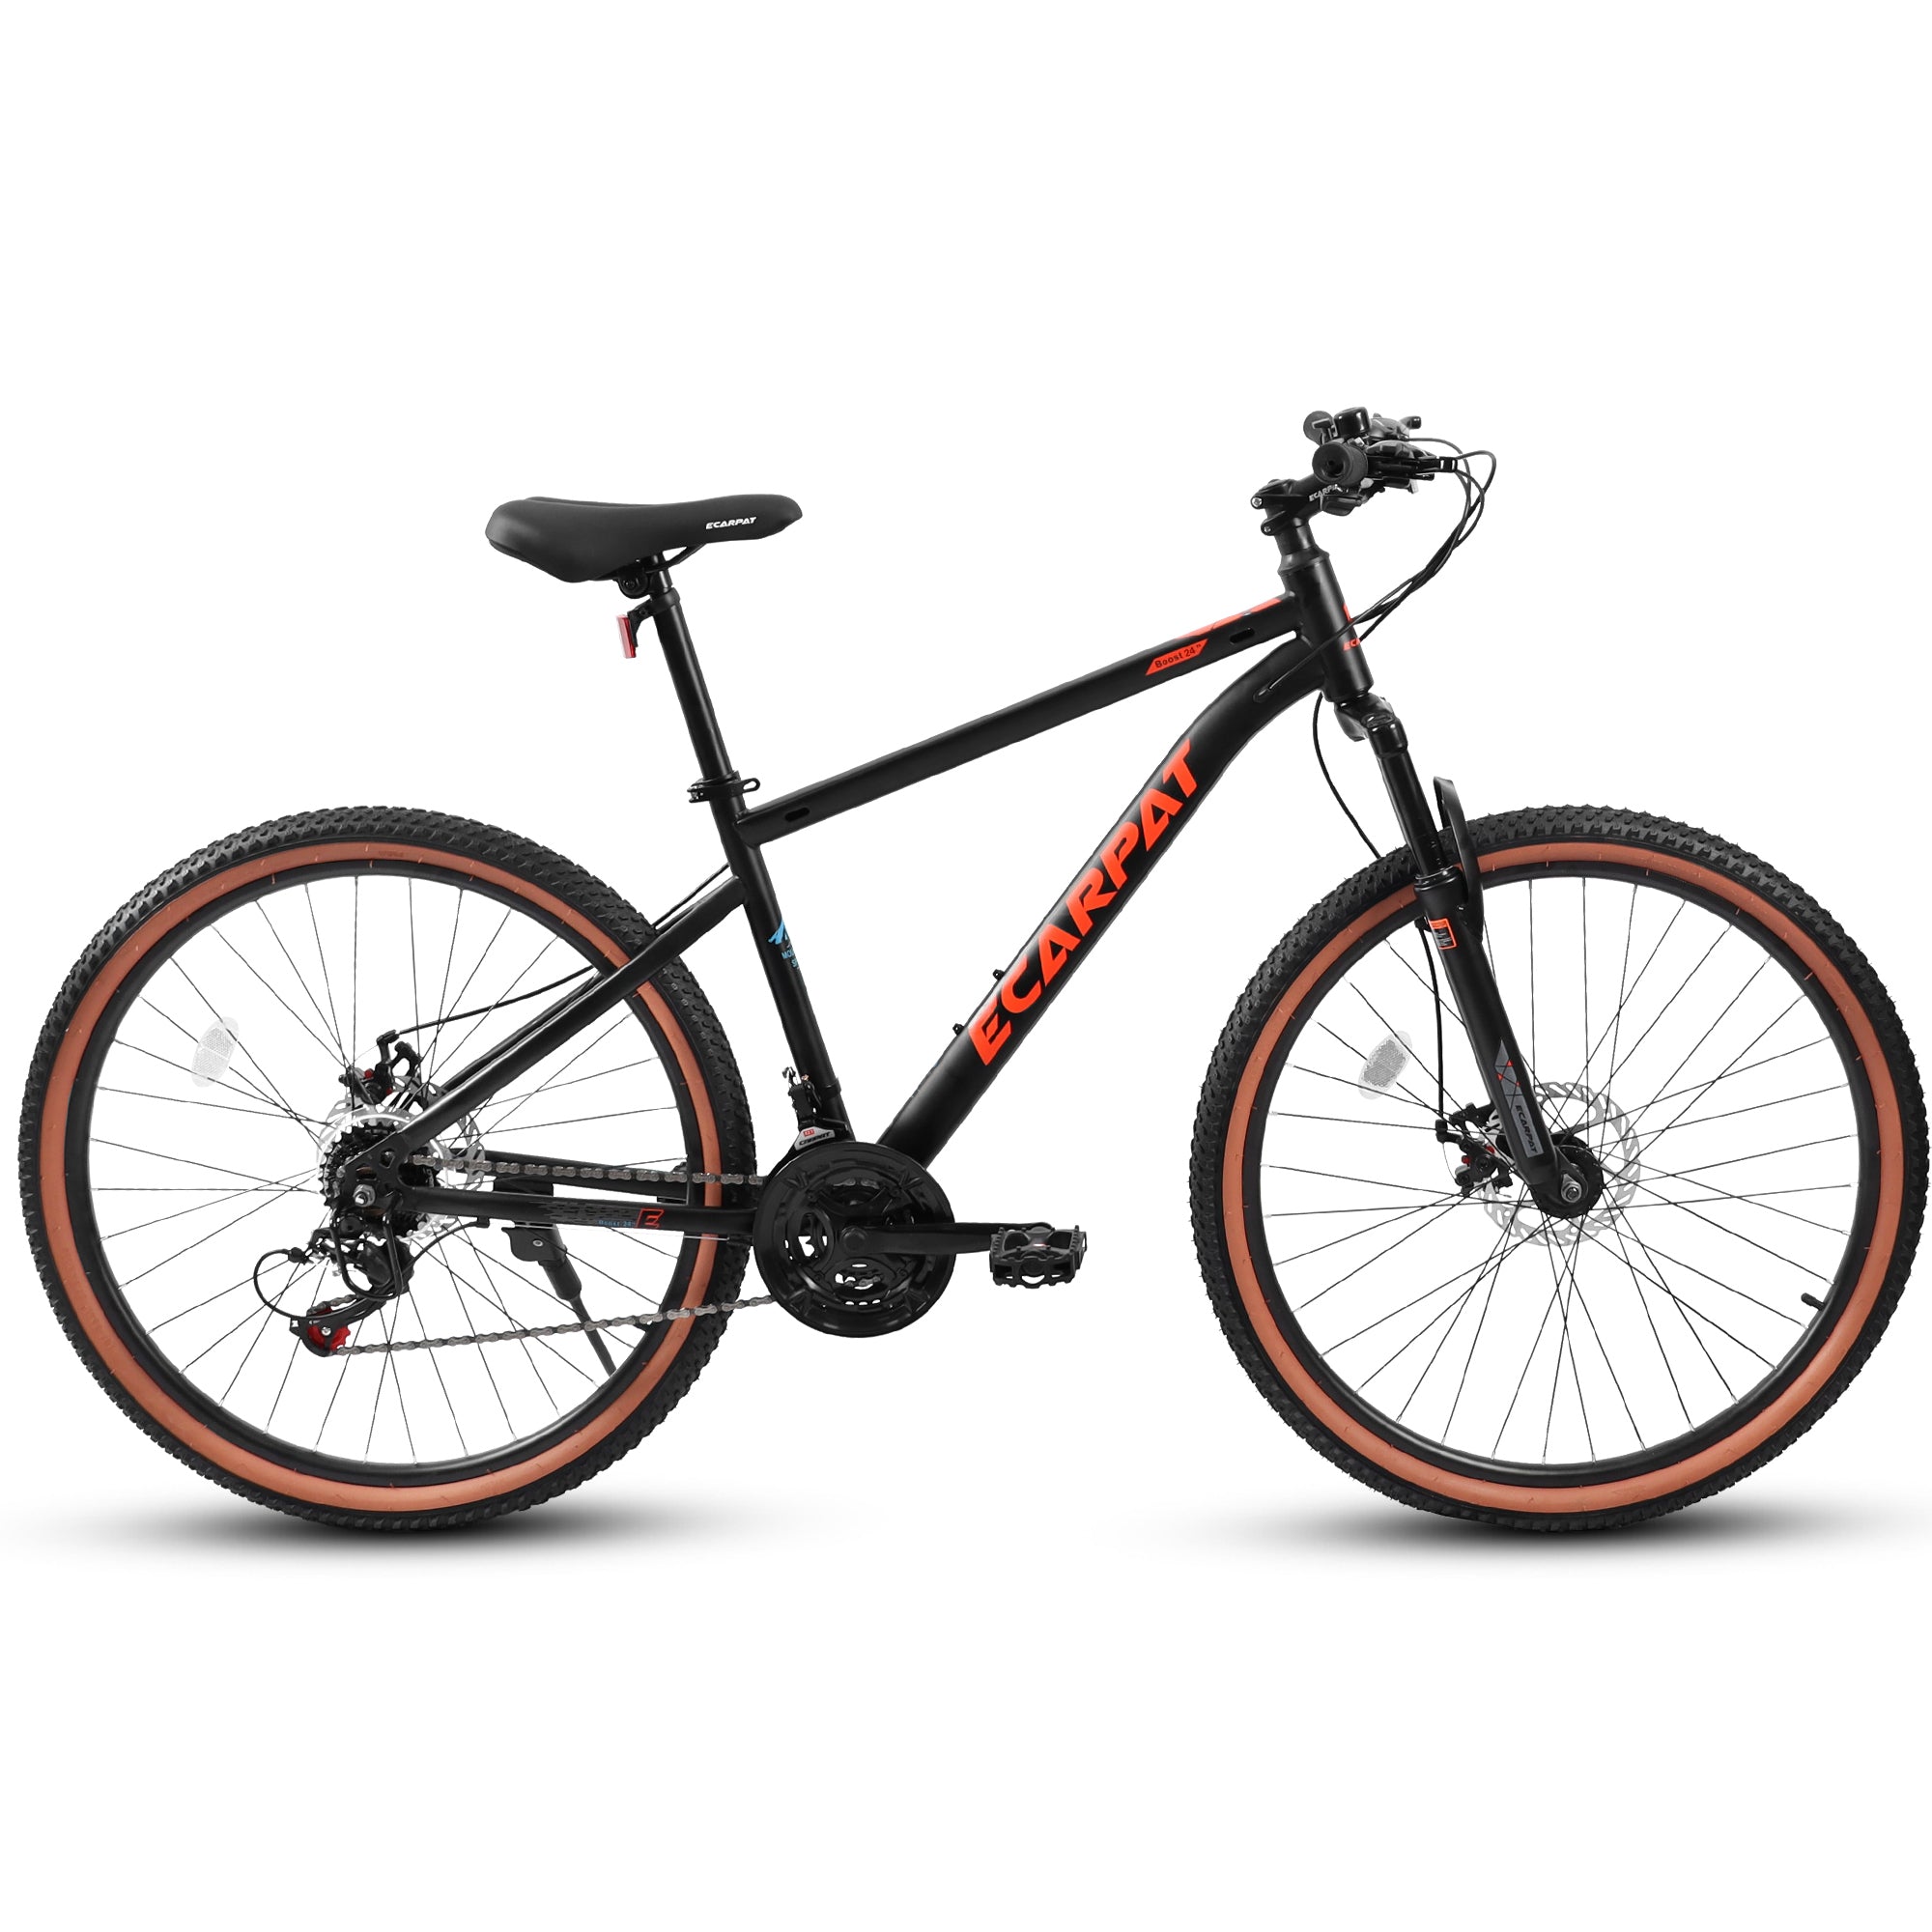 A24301-Ecarpat-Mountain-Bike-24-Inch-Wheels,-21-Speed-Mens-Womens-Trail-Commuter-City-Mountain-Bike,-Carbon-steel-Frame-Disc-Brakes-Thumb-Shifter-Front-Fork-Bicycles-Exercise-&-Fitness